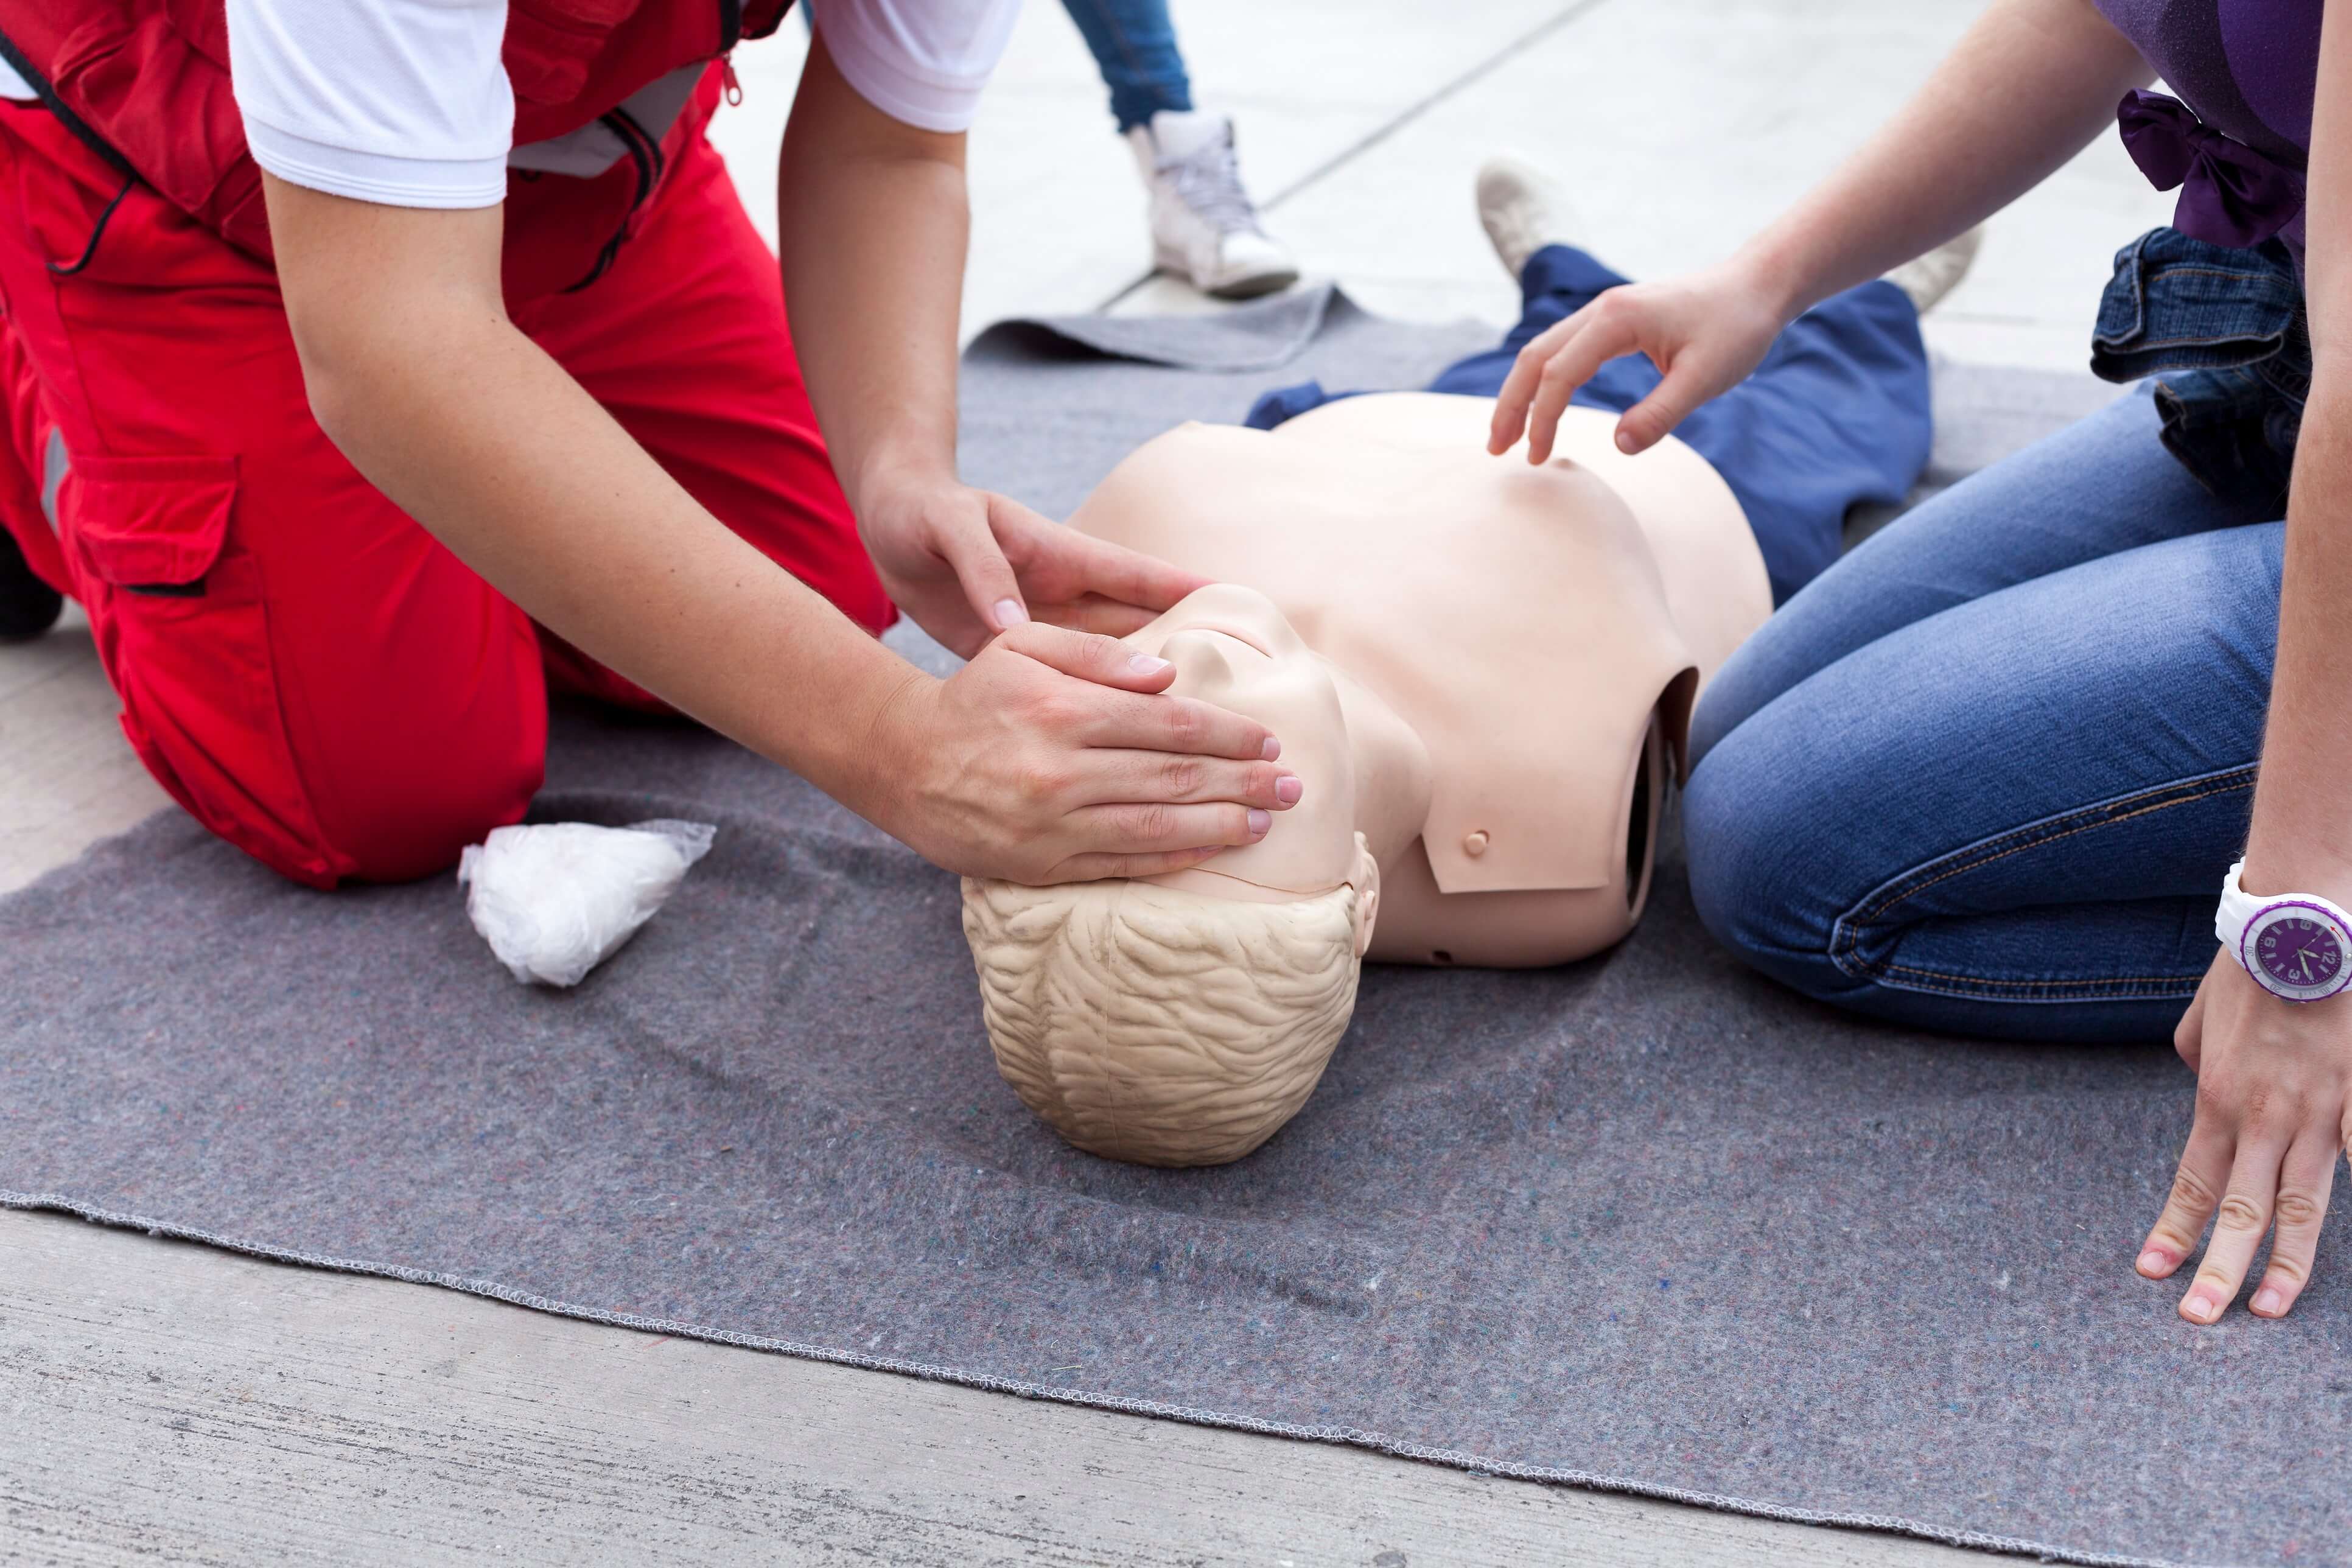 Are You Prepared to Save a Life? Why Everyone Needs First Aid Training